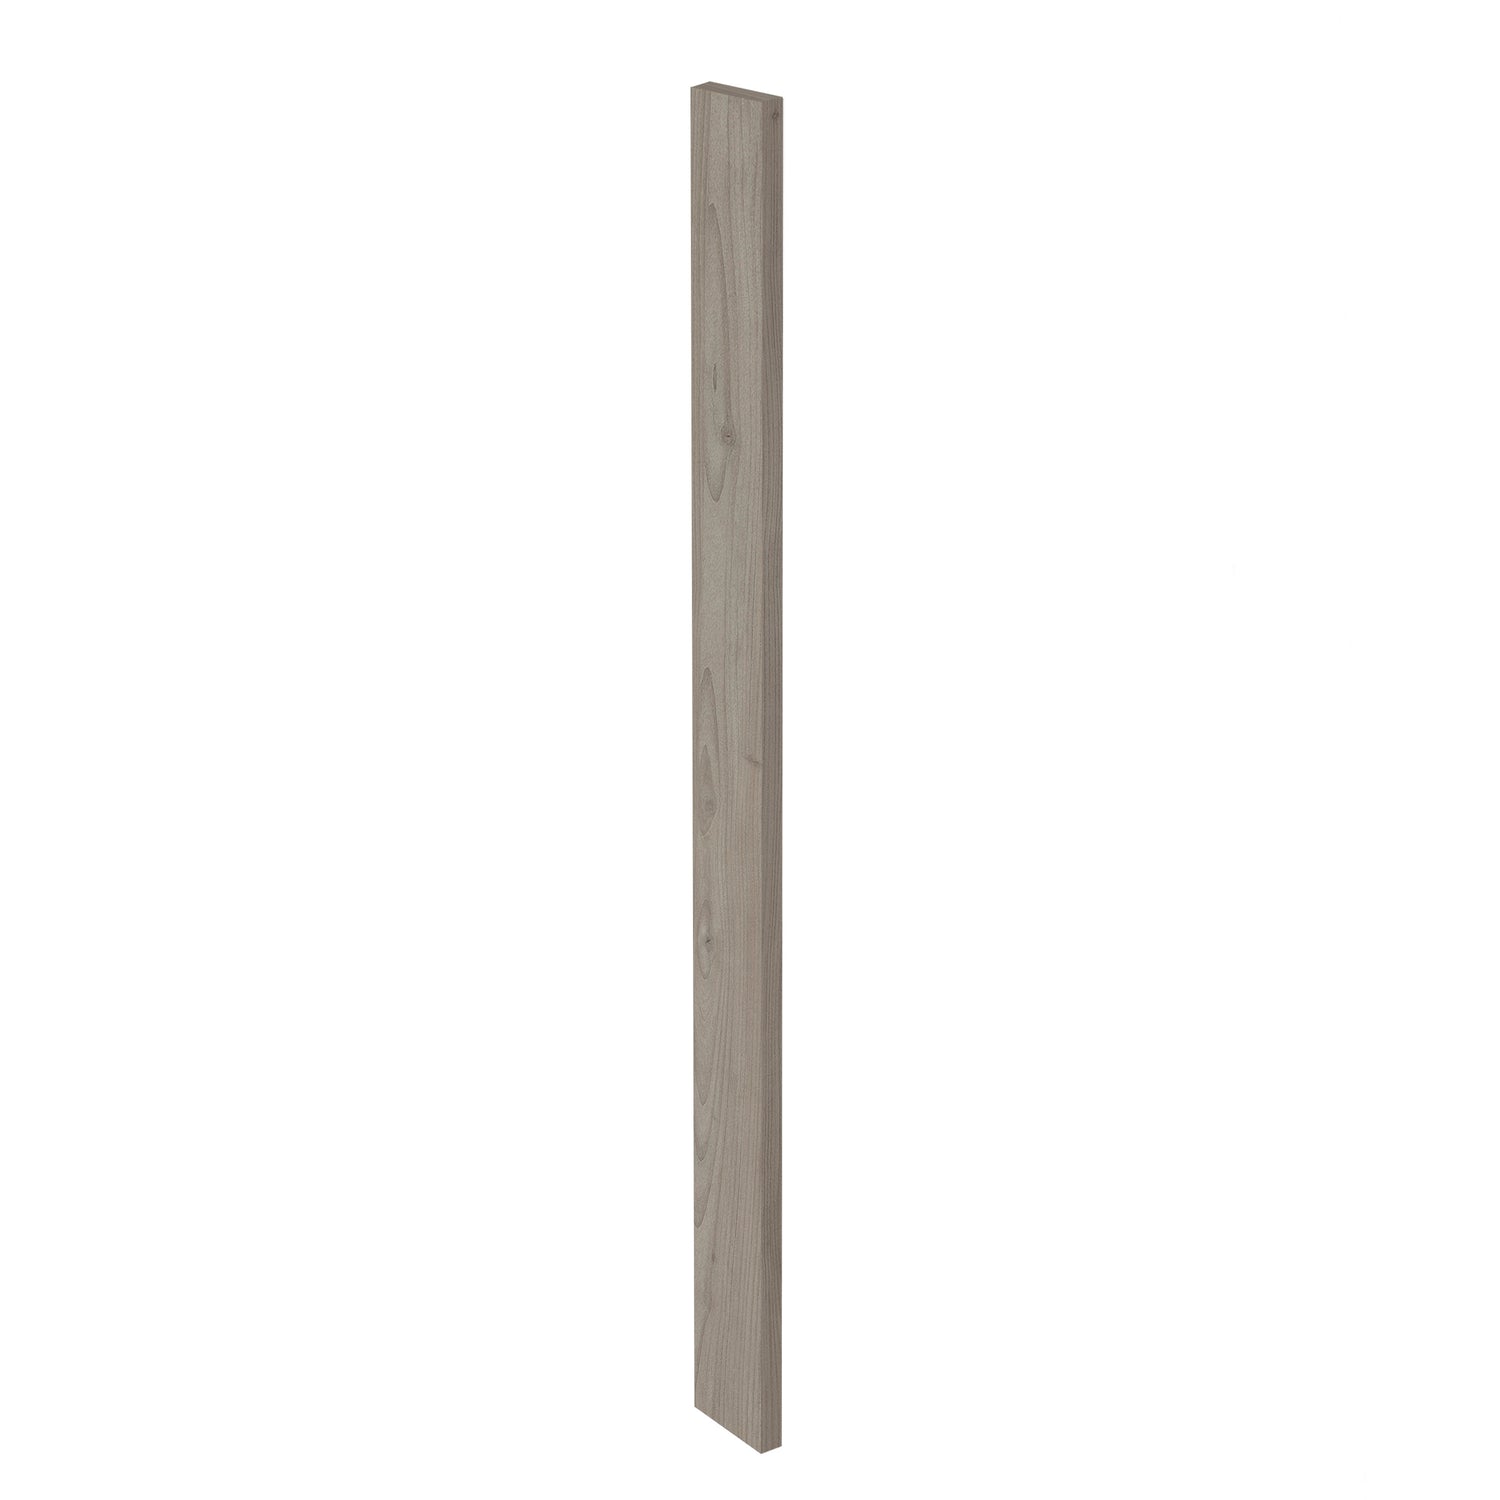 Grey Nordic Slab Style Kitchen Cabinet Filler (3 in W x 0.75 in D x 96 in H) -  Pro-Edge HD